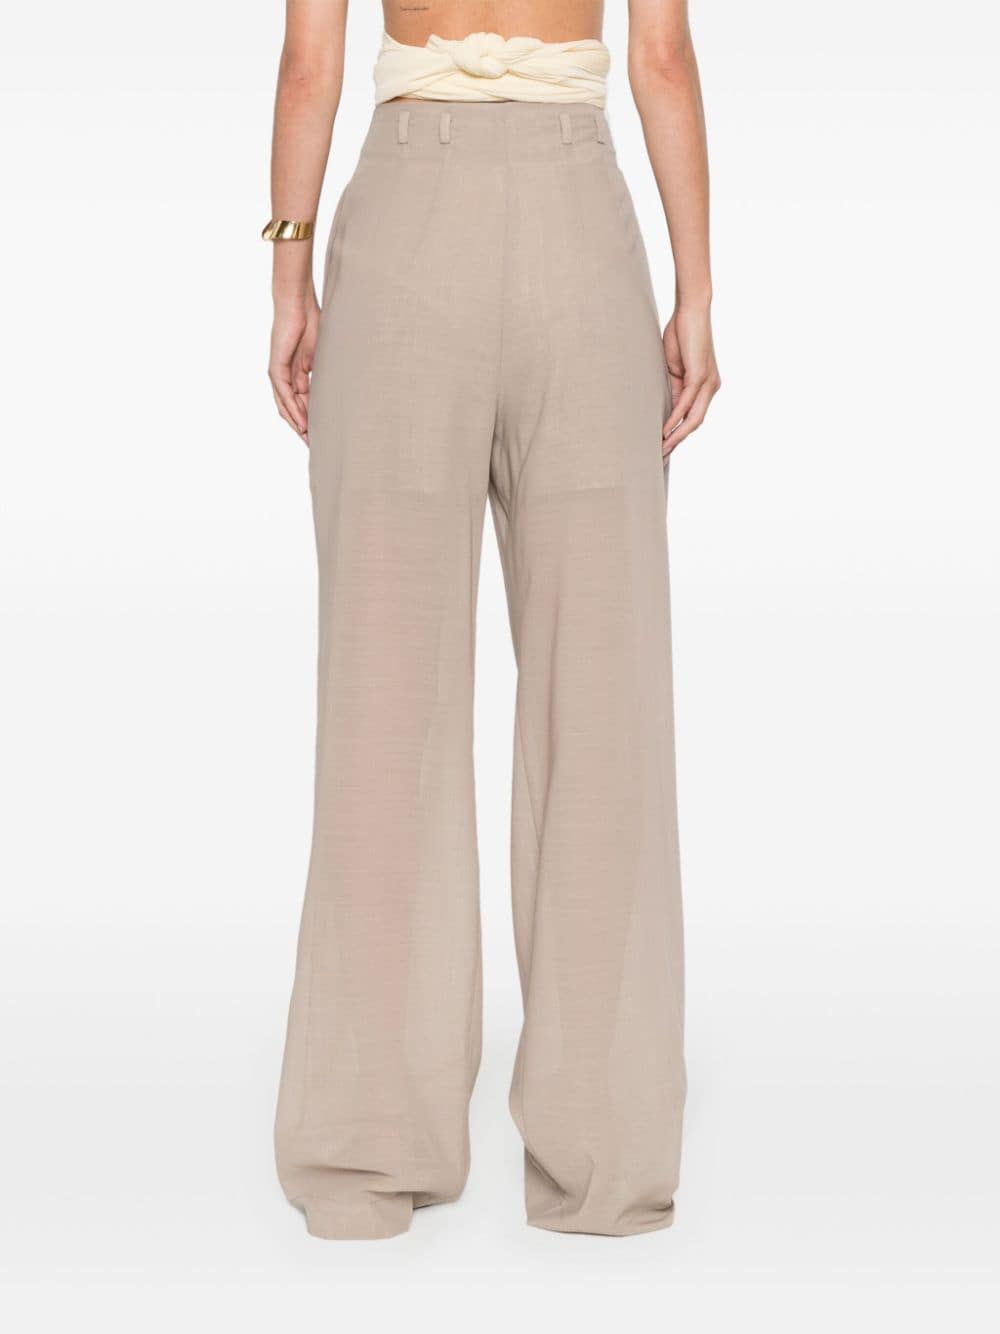 Semi-transparent trousers with crease